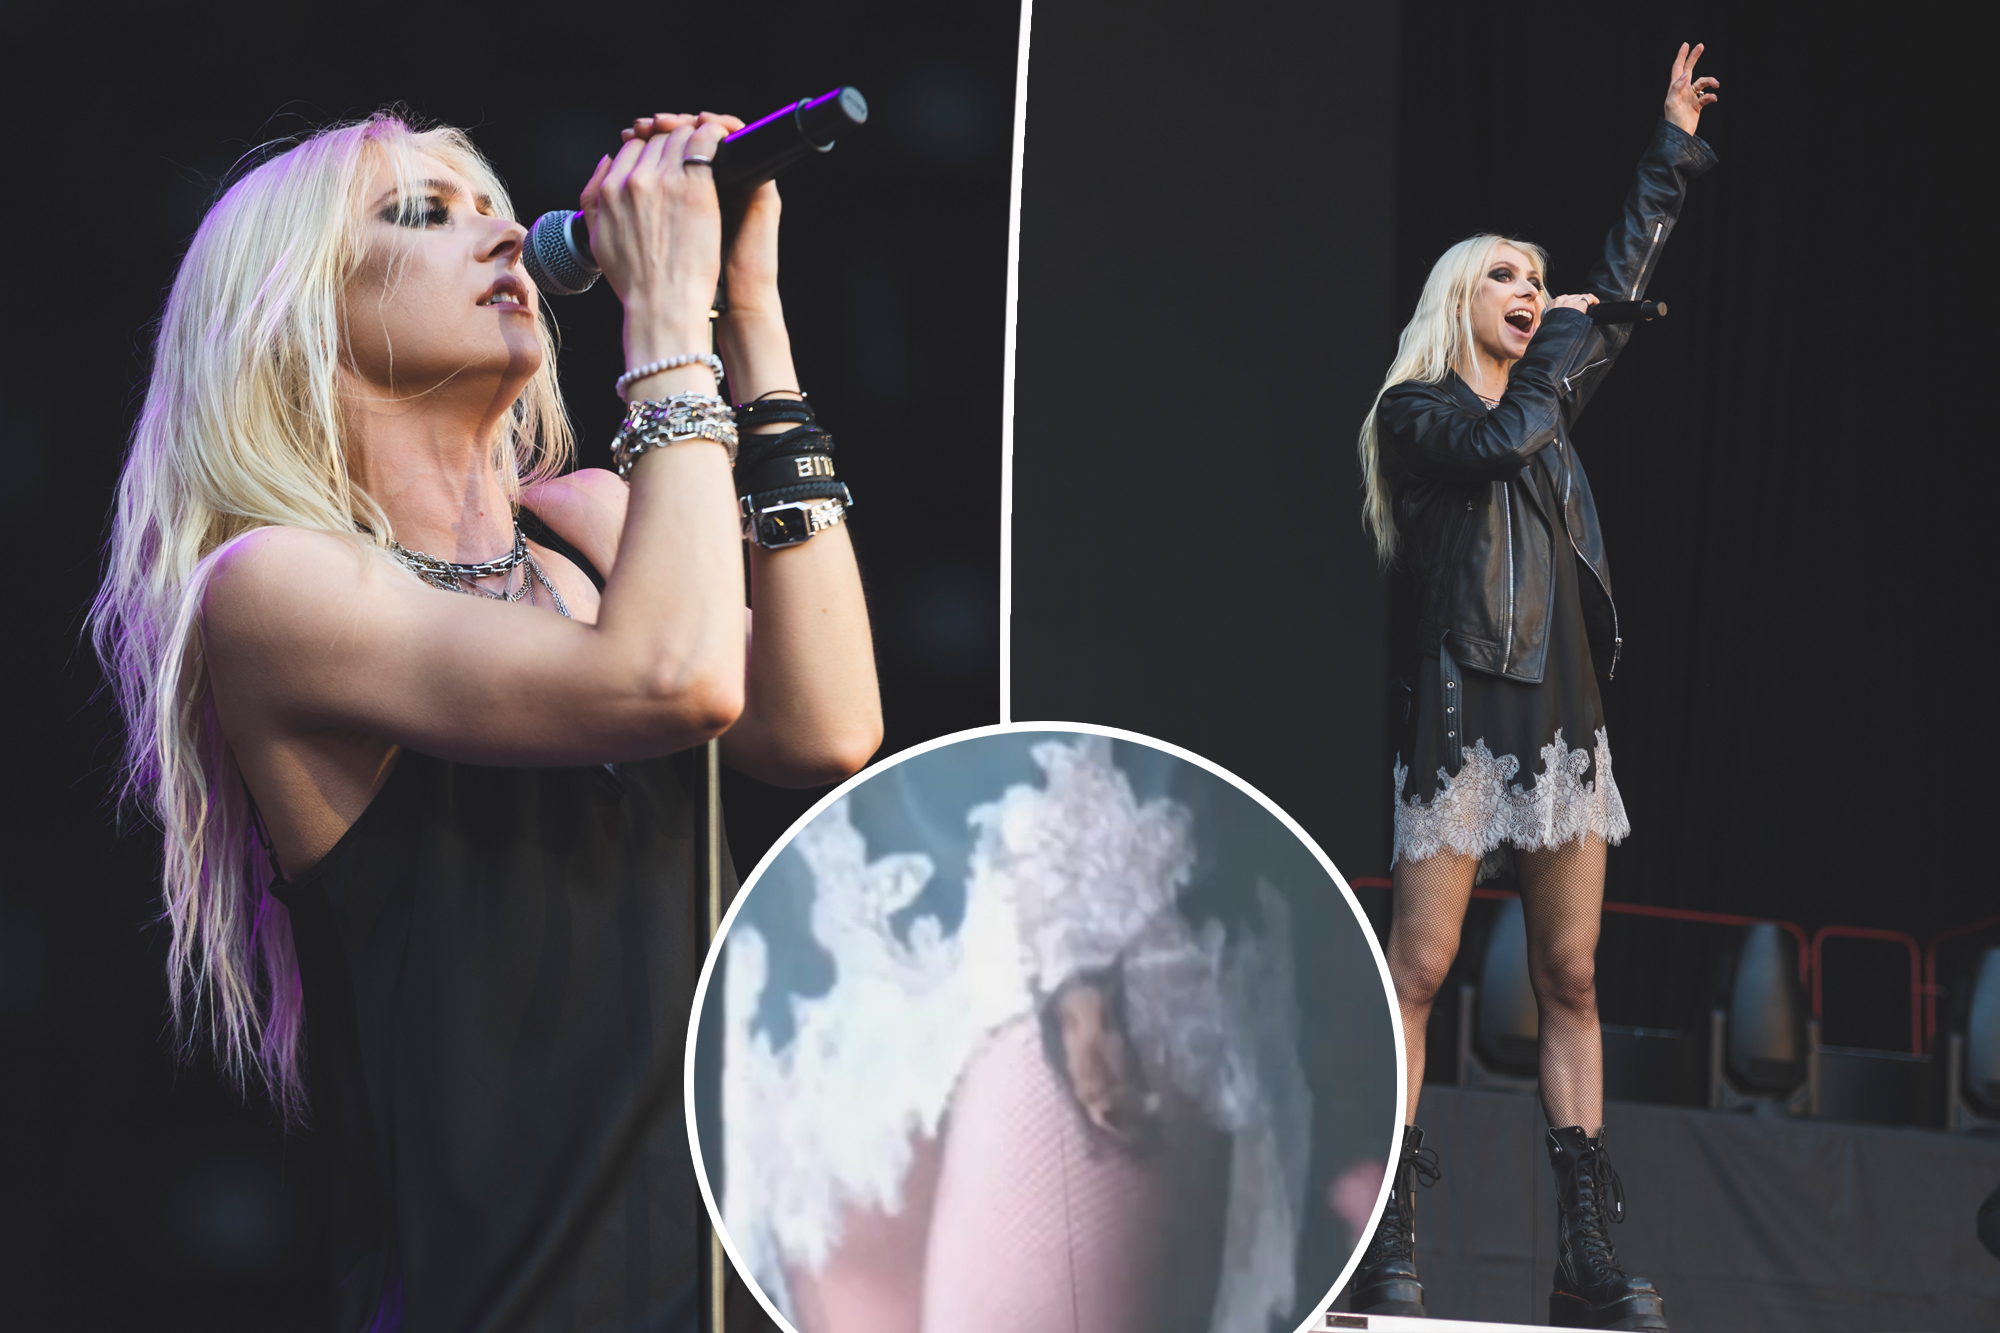 Taylor Momsen's Bat Encounter: A Rock and Roll Moment